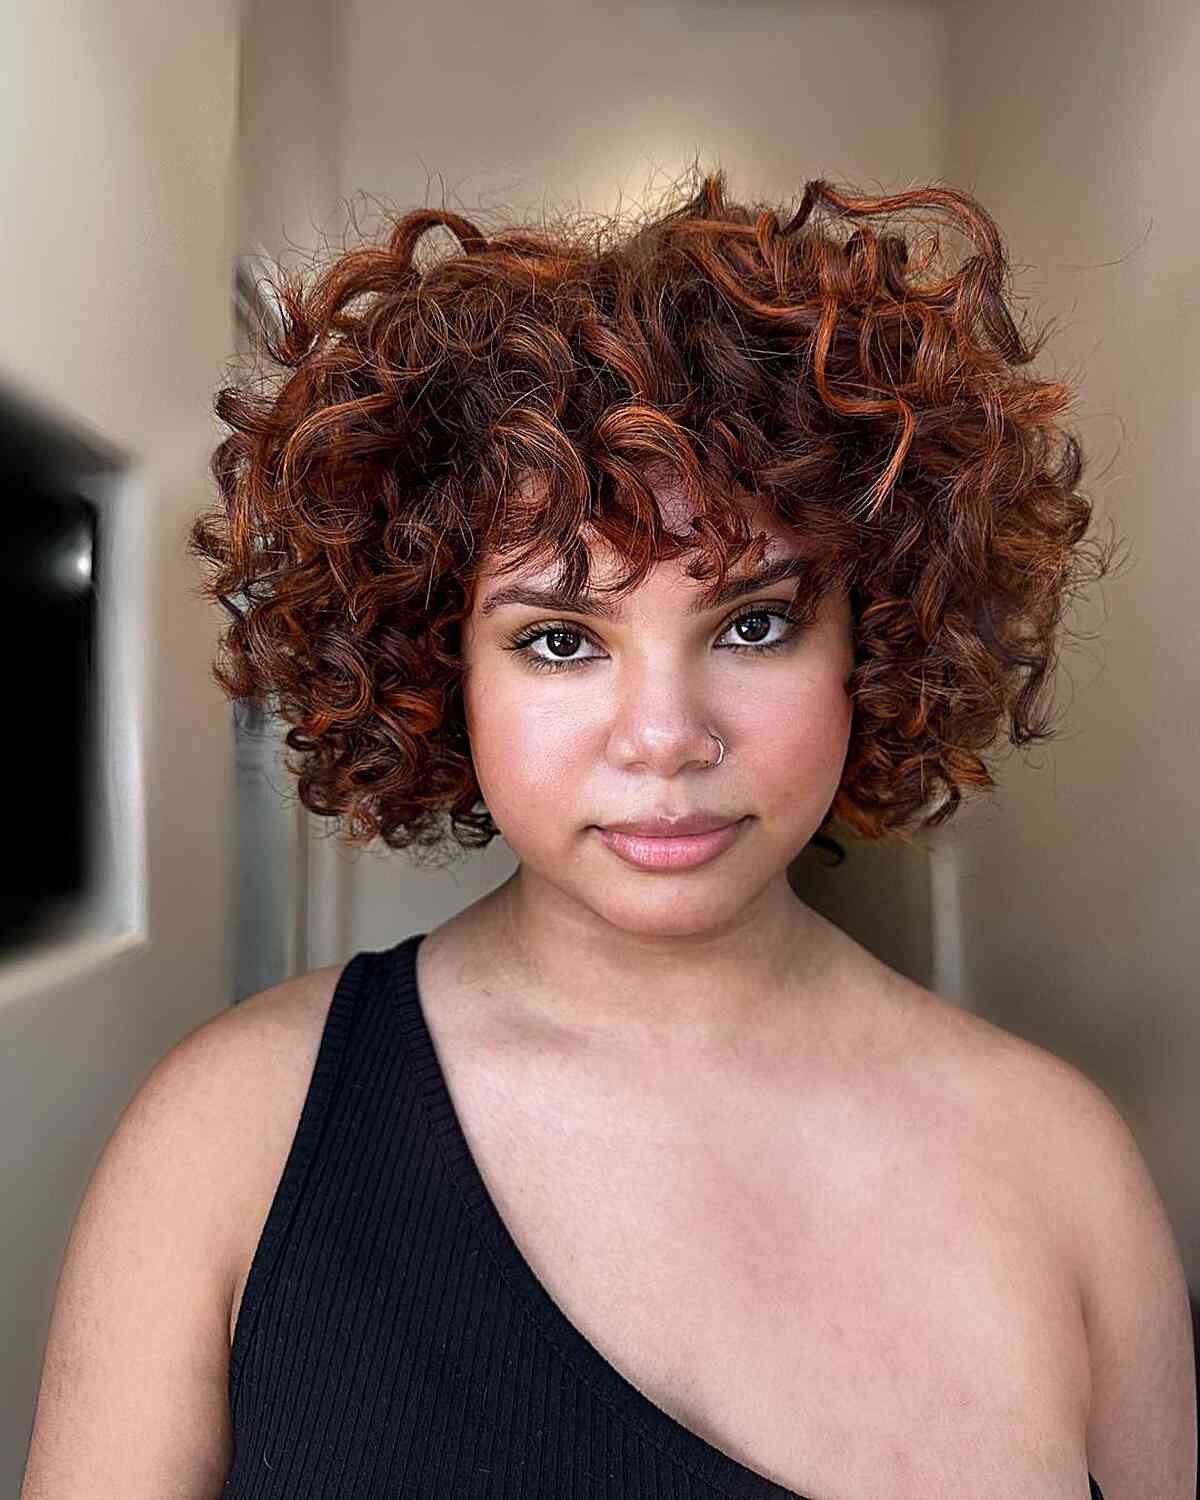 Auburn Highlights for Short Curly Hair with Bangs for women with thick kinks